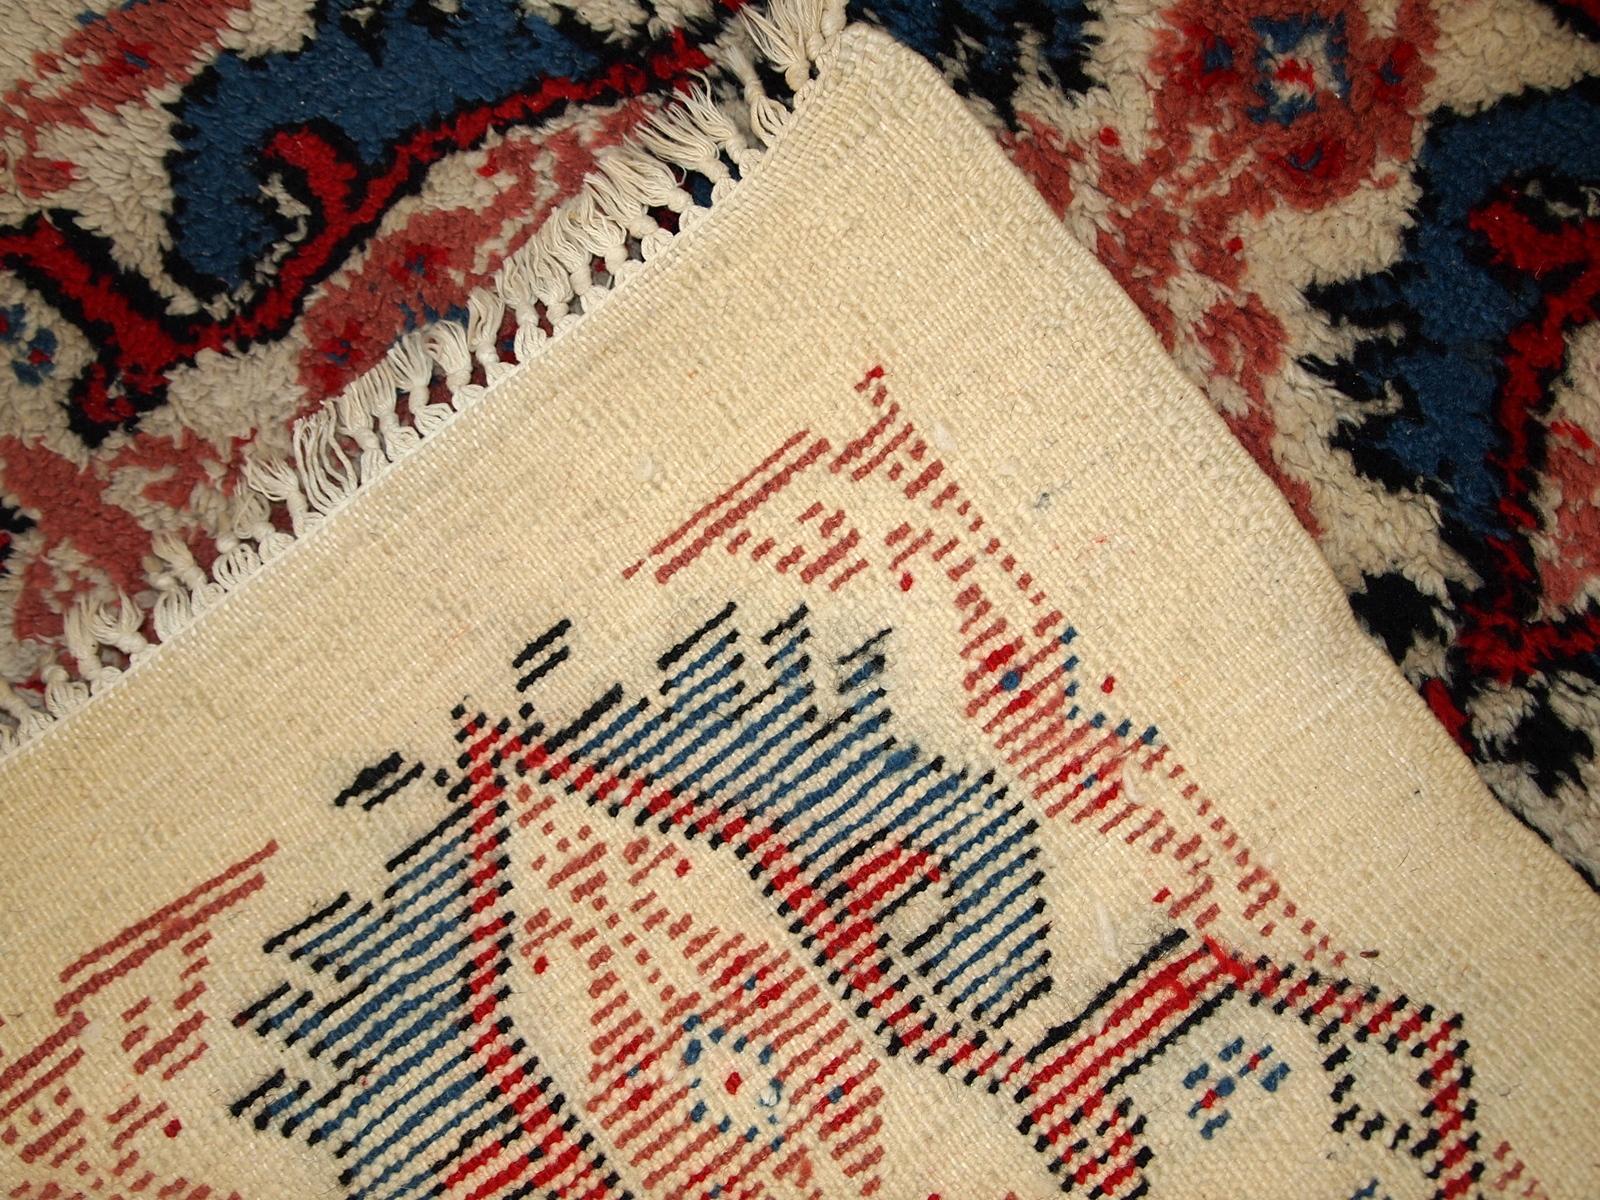 Handmade vintage Moroccan Berber rug in white, blue and red wool. The rug is in original good condition, from the end of 20th century.

- Condition: original good,

- circa 1970s,

- Size: 2.6' x 5.4' (80cm x 165cm),

- Material: wool,

-